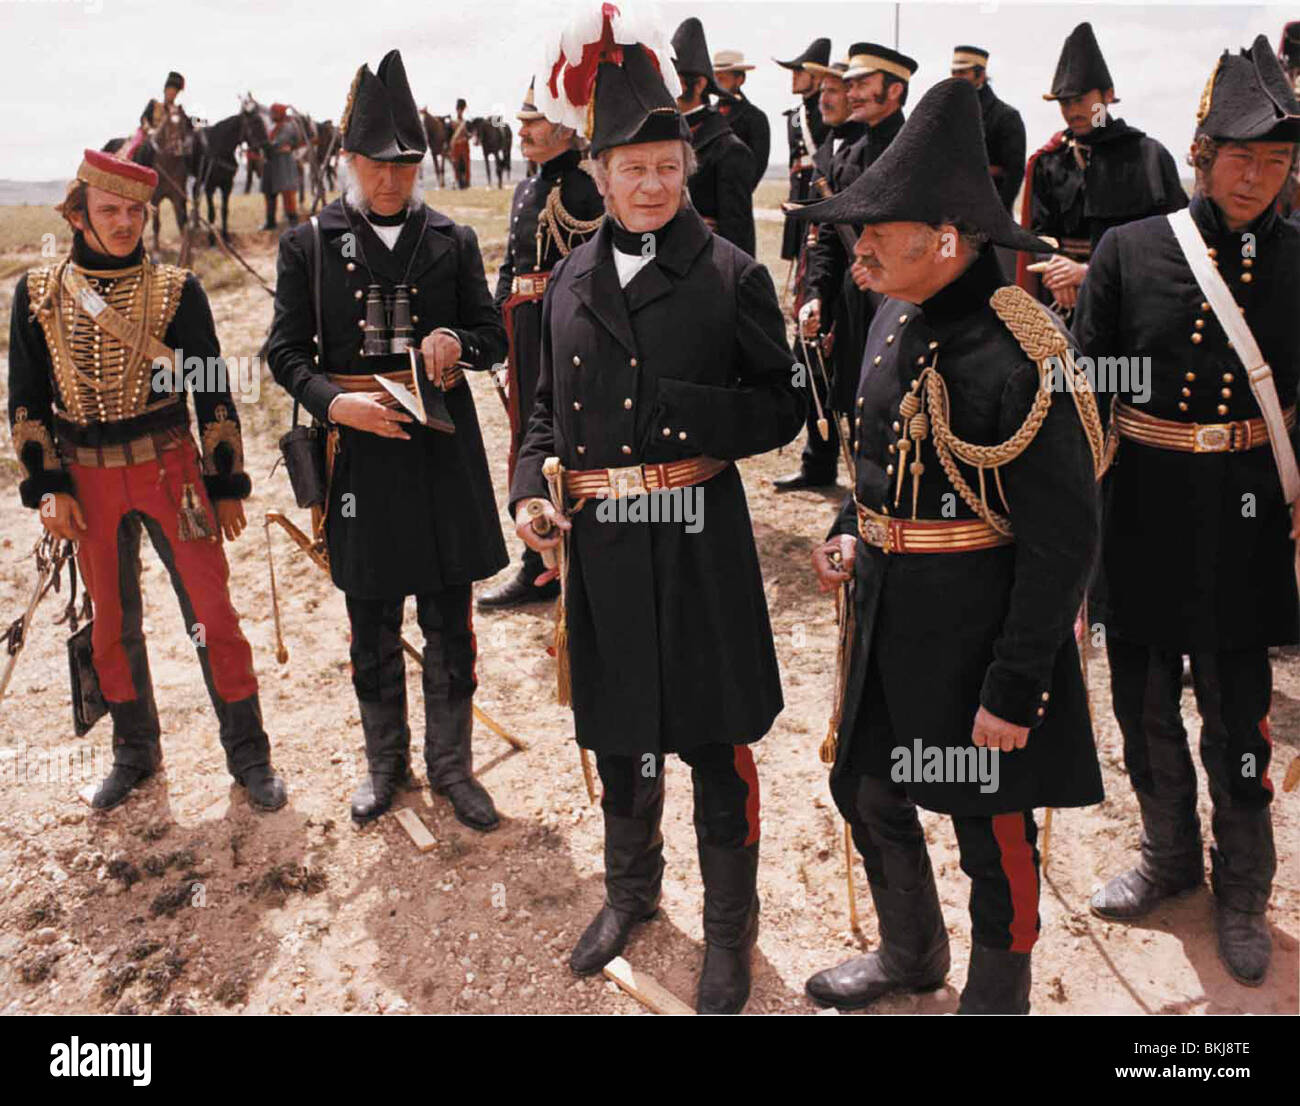 THE CHARGE OF BRIGADE (1968) DAVID JOHN GIELGUD CLBG 001-02 Stock Photo - Alamy